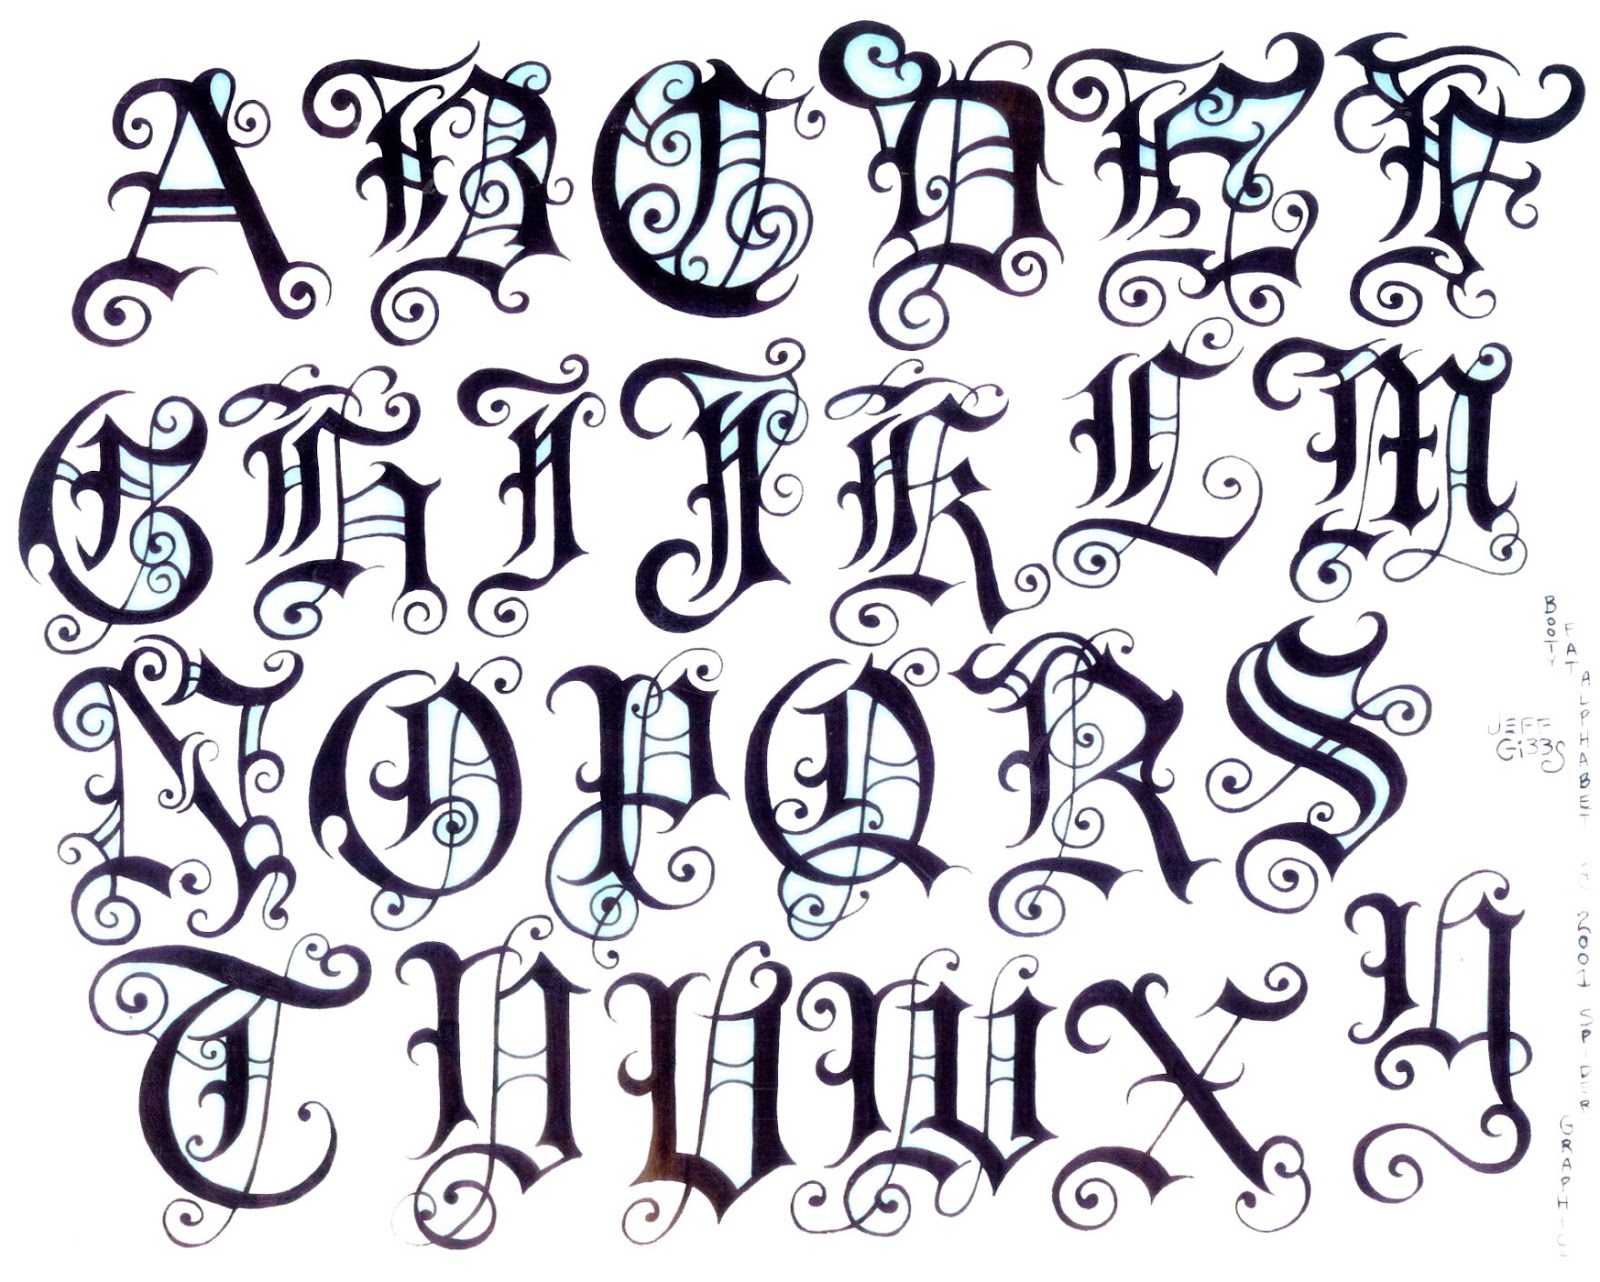 10 Graffiti Old English Font Images Old English Tattoo Fonts Old English Tattoo Letter Fonts Alphabet And Graffiti Fonts Alphabet Old English Letter Newdesignfile Com Gangster letter tattoo gangster letters. newdesignfile com